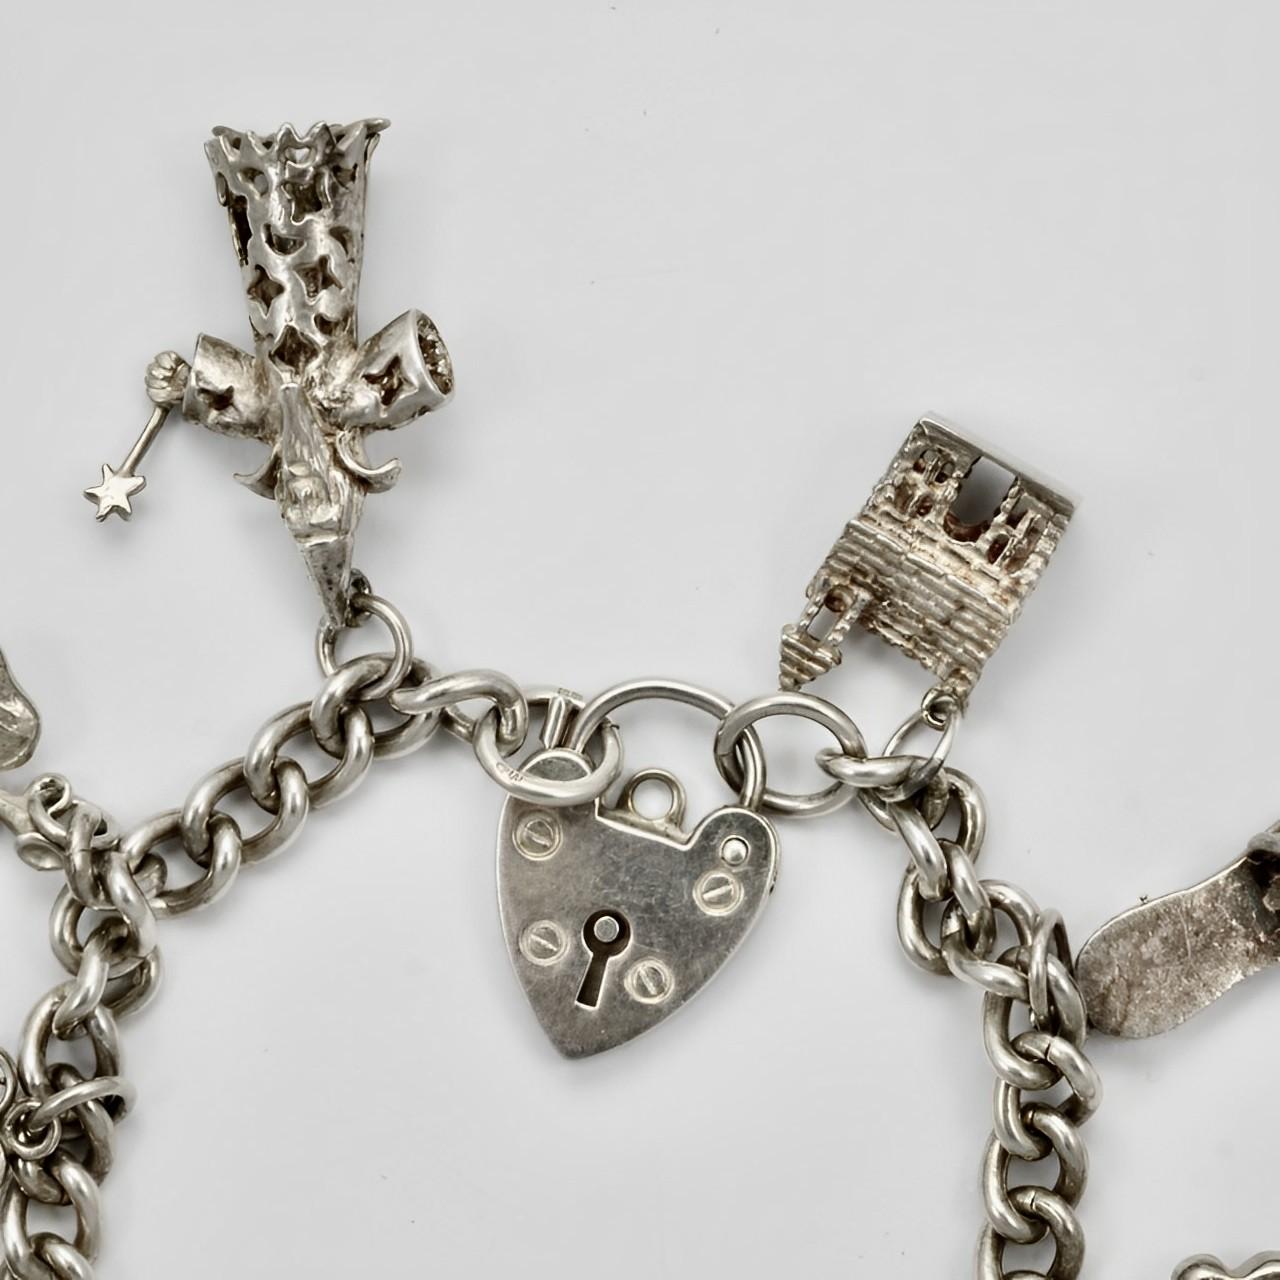 Delightful English sterling silver charm bracelet with a heart lock clasp. The safety chain is missing. There are ten charms: 2 x 21 keys, wizard, four leaf clover, opening house with a person inside, Noah's ark, trolley with a moving wheel, Chinese